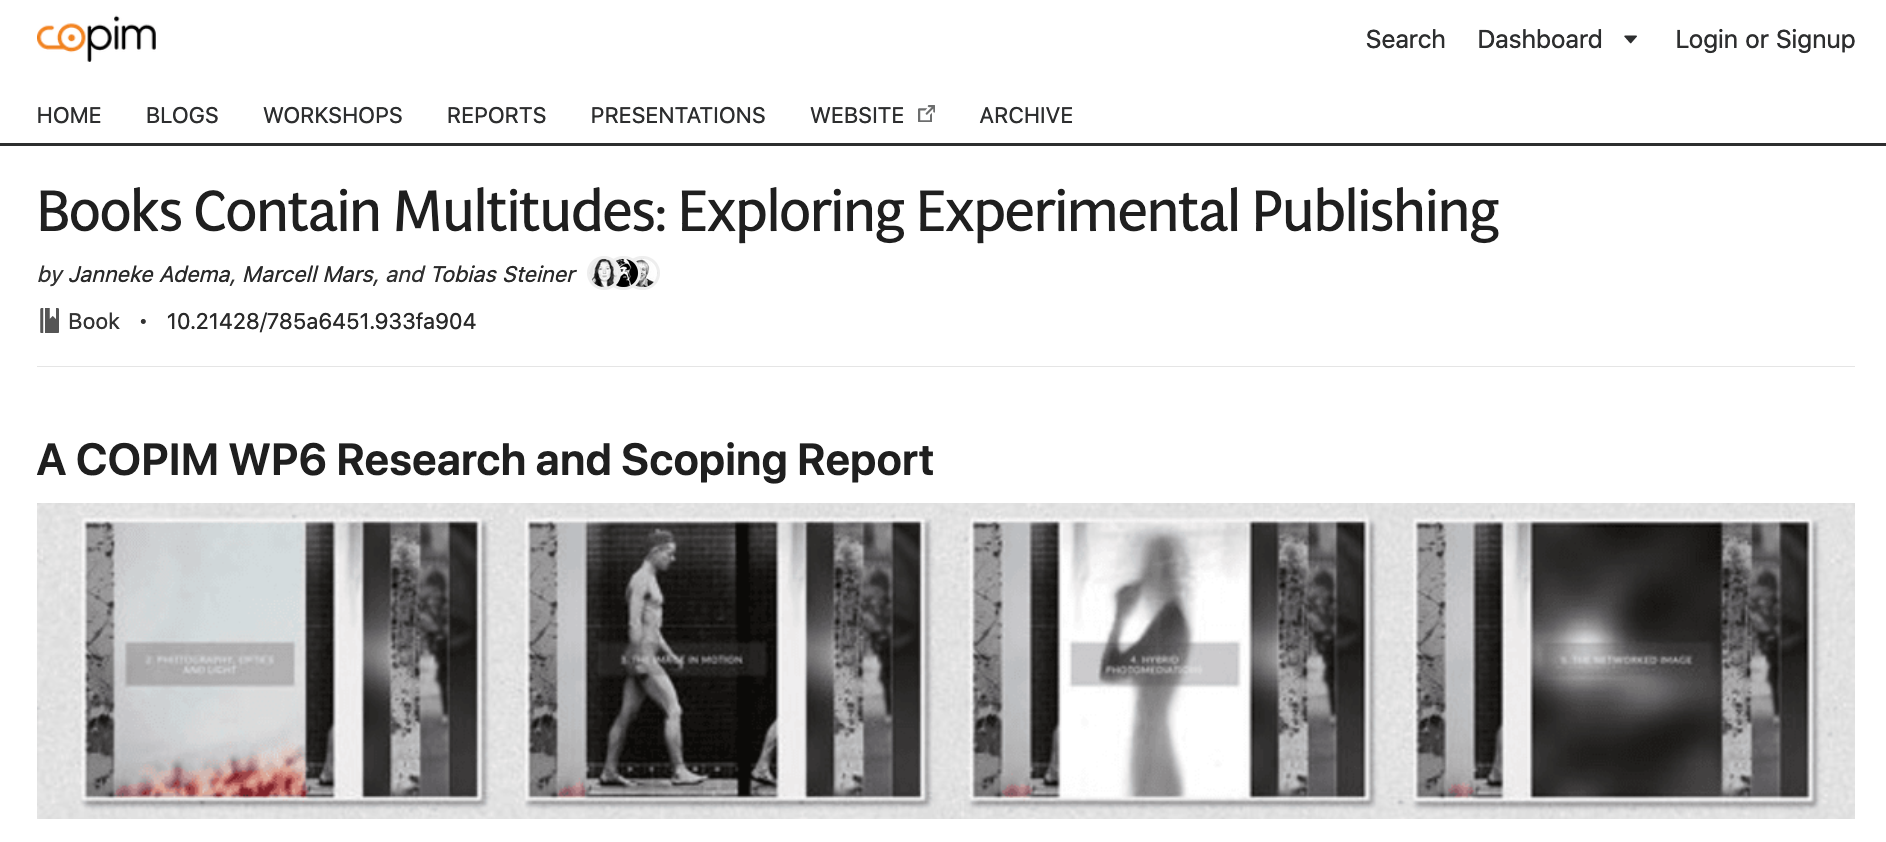 Just Published: “Books Contain Multitudes: Exploring Experimental Publishing” (A COPIM WP6 Research and Scoping Report)